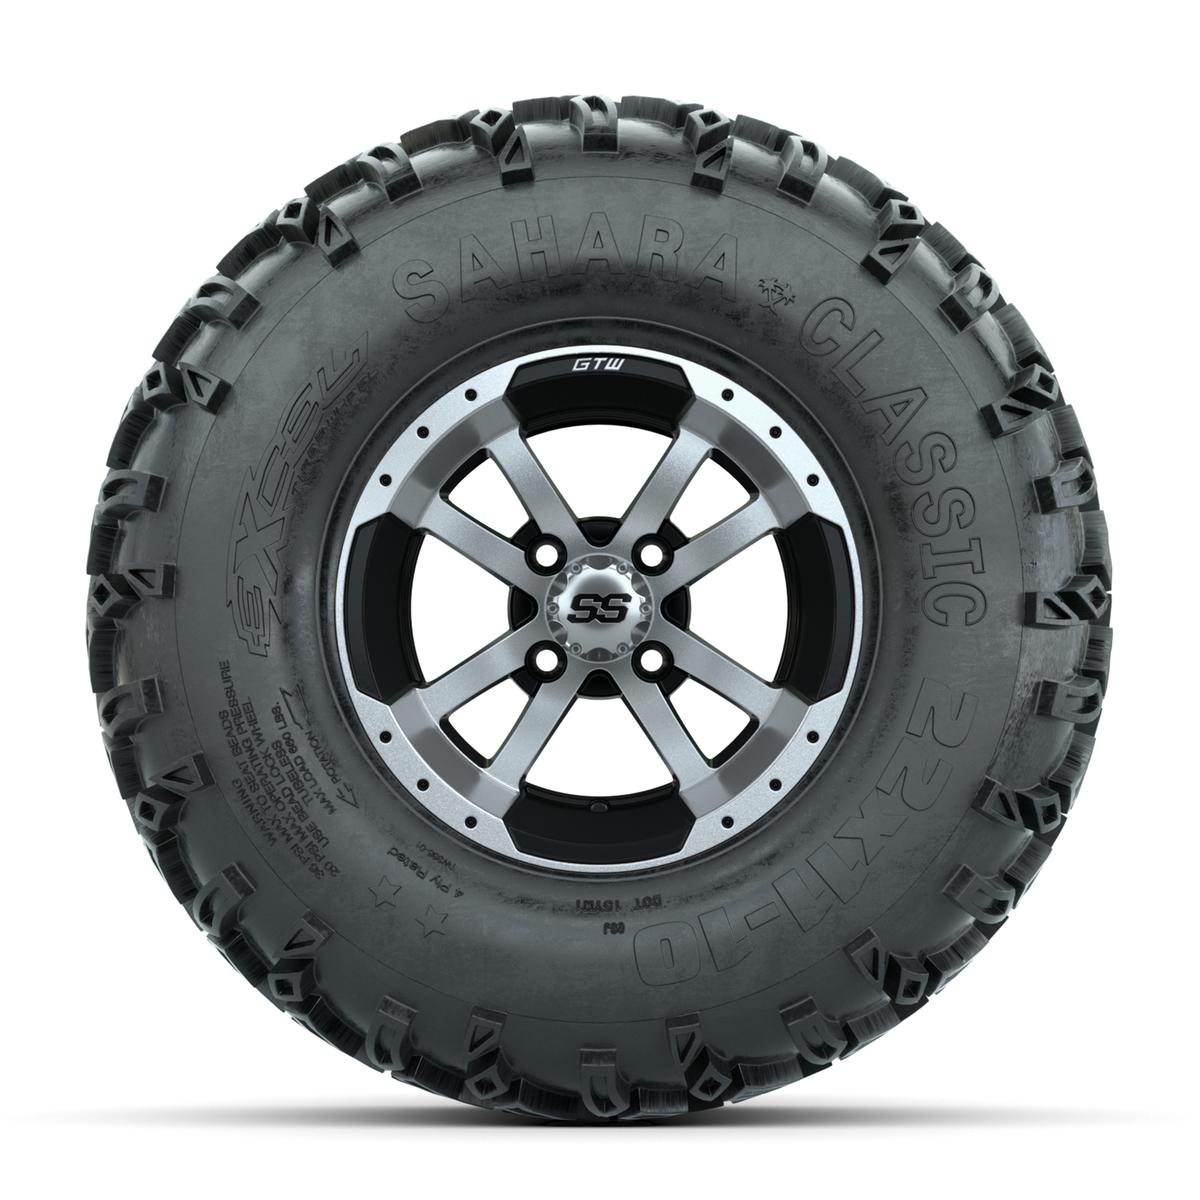 Set of (4) 10 in GTW Storm Trooper Wheels with 22x11-10 Sahara Classic All-Terrain Tires